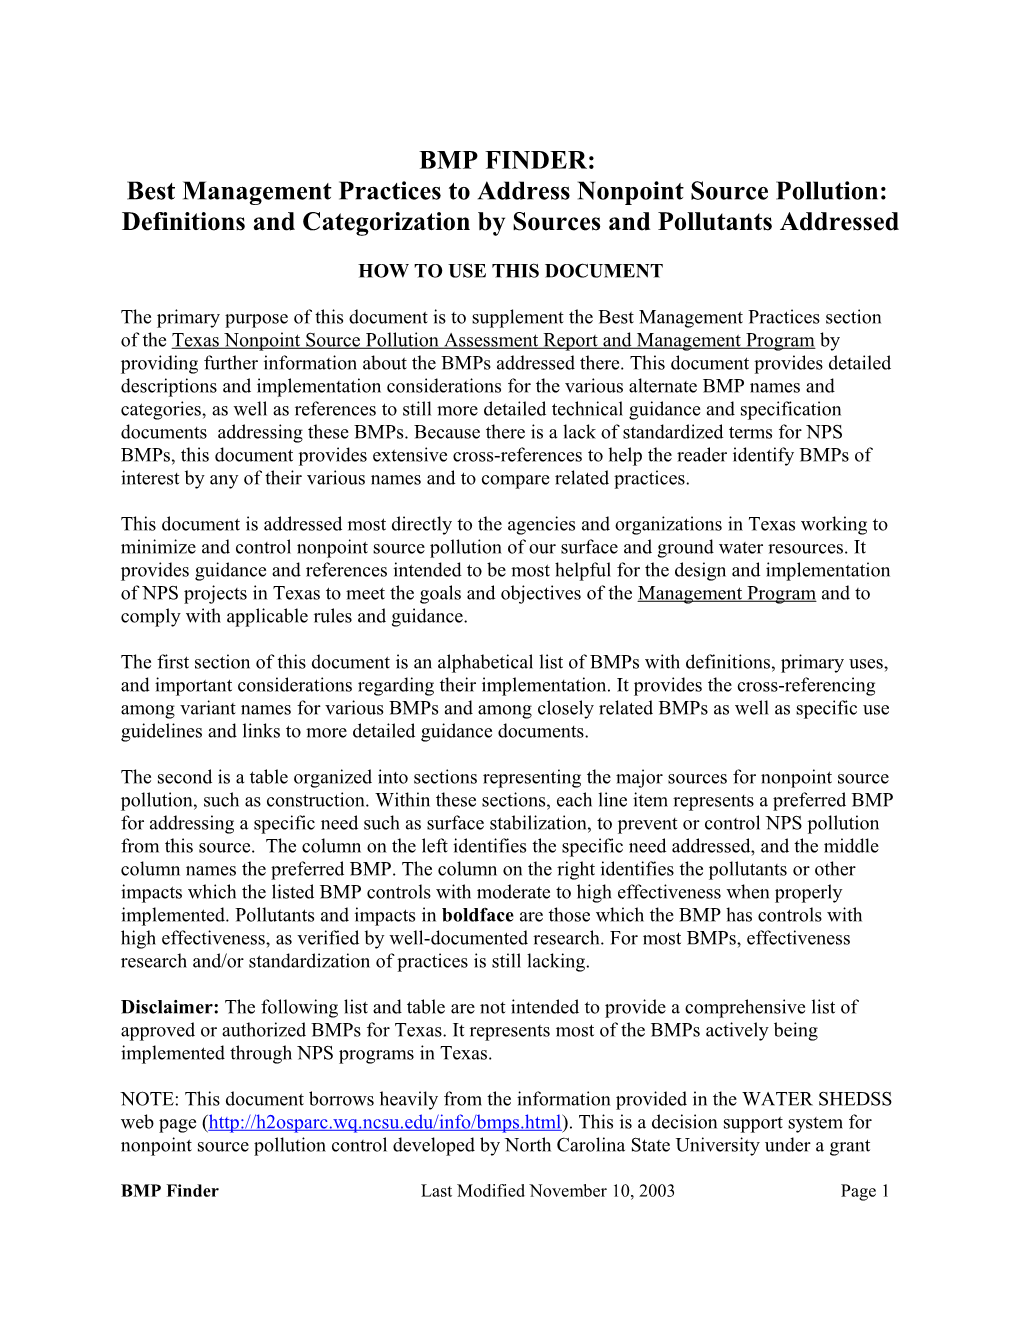 Best Management Practices to Address Nonpoint Source Pollution